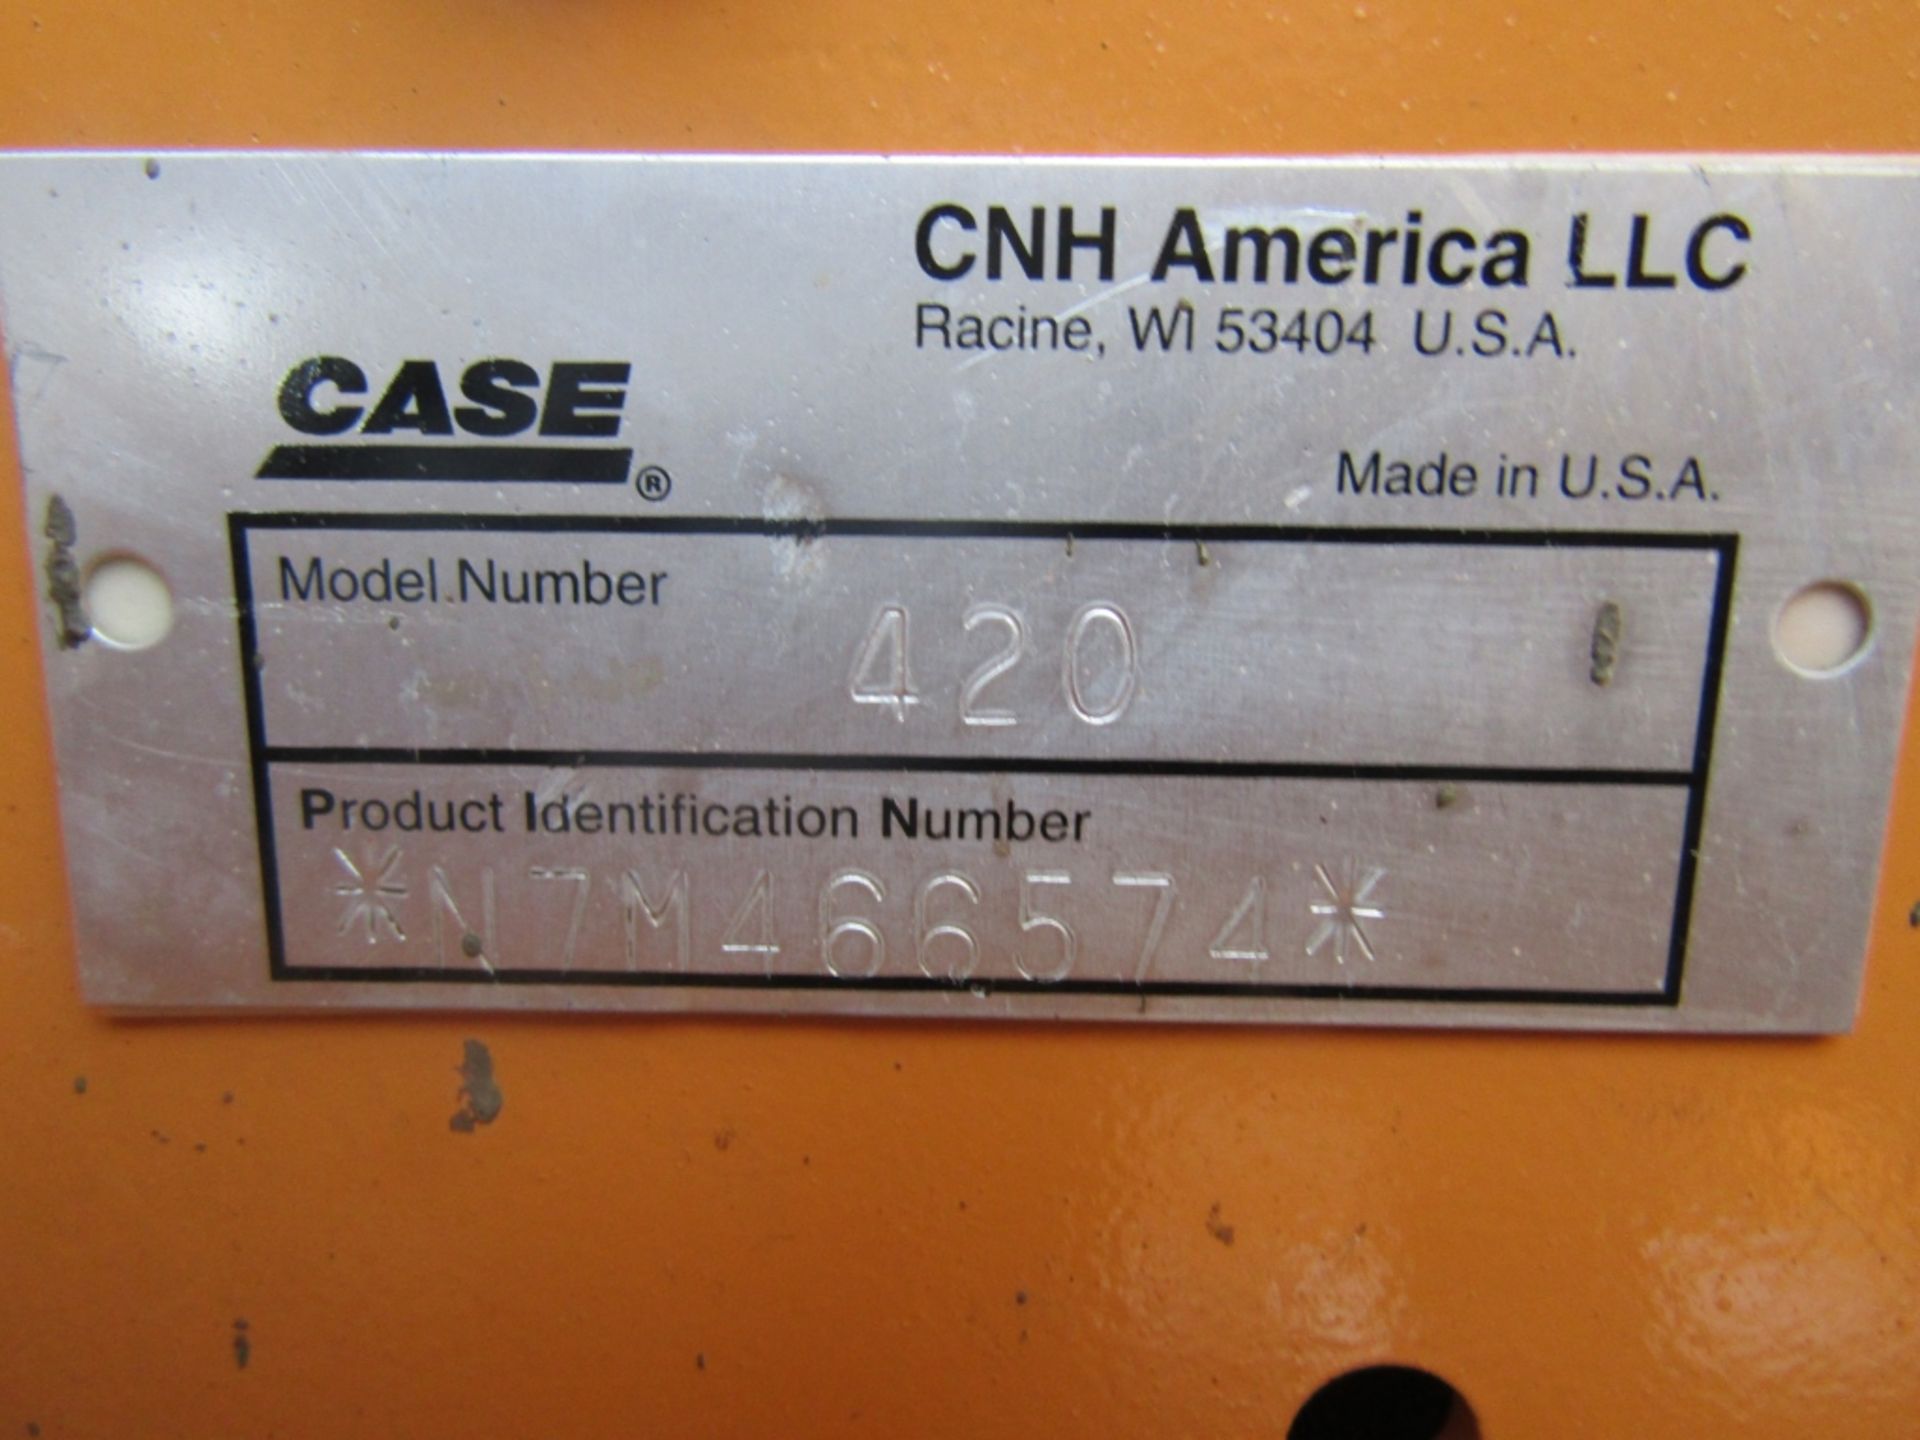 2008 Case 420 Uniloader, 198 Hours, ID #N7M466574, Enclosed rope, bucket., - Image 4 of 18